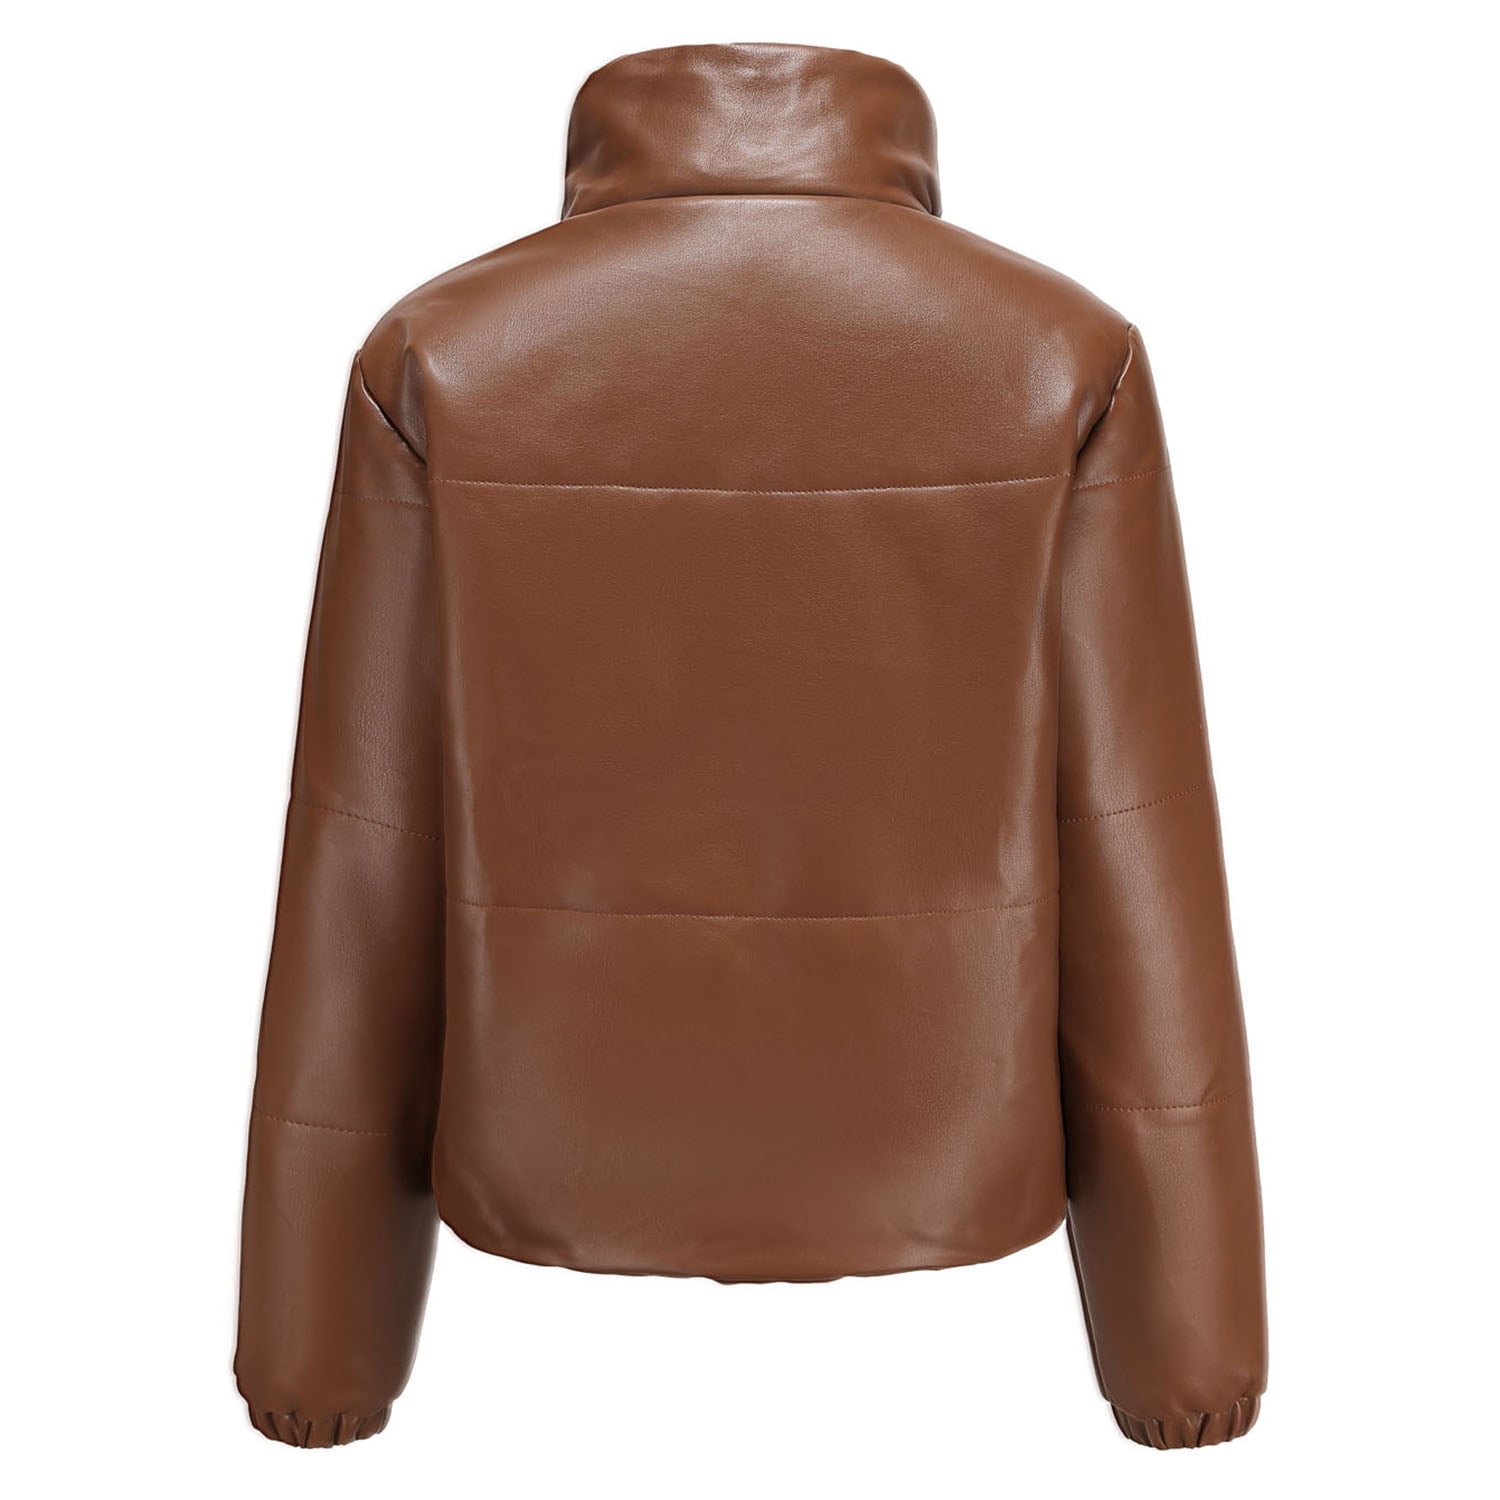 Faux leather puffer jacket - pull&bear